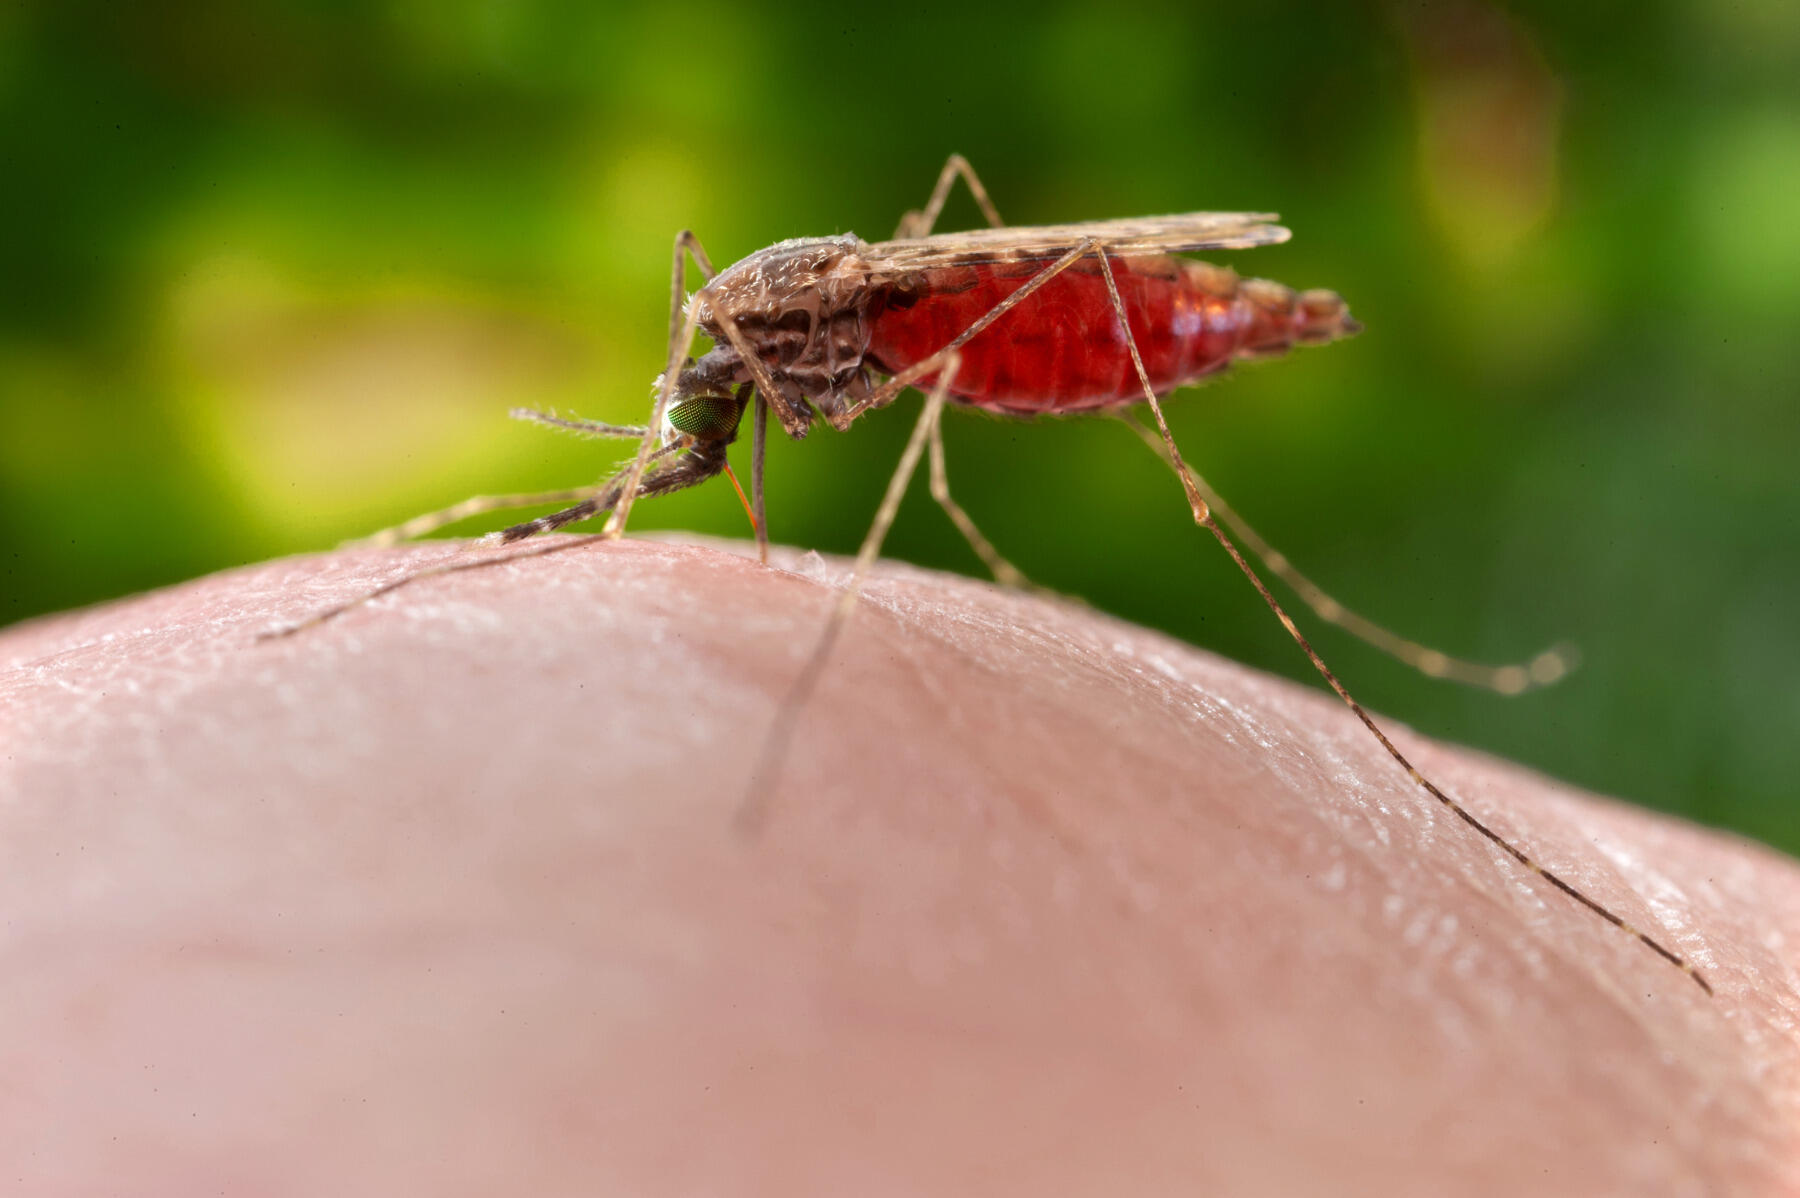 A mosquito bites.
<br>Centers for Disease Control and Prevention/James Gathany